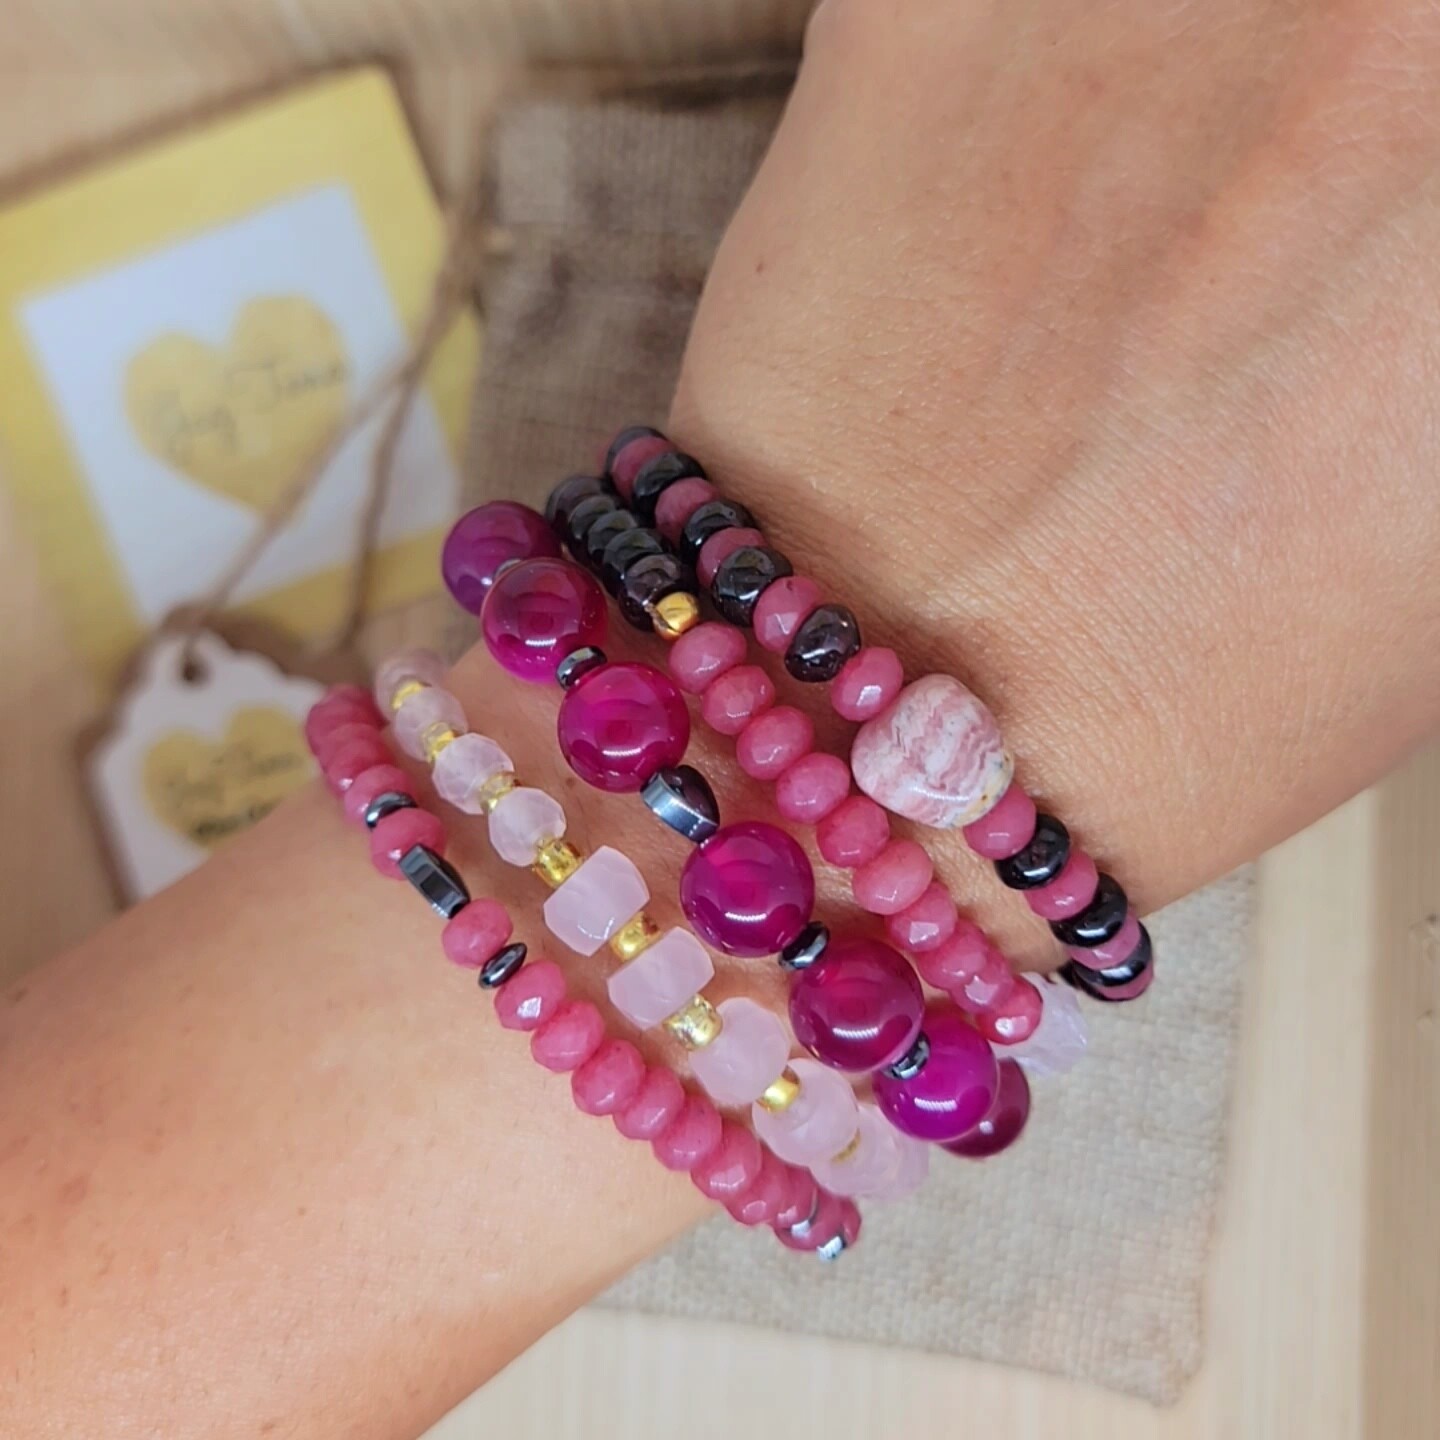 Lover stack of 5. Ruby Jade, chalcedony rose quartz, garnet valentine's bracelets with heart charms. Pink bracelets FOR LOVE AND COMPASSION.